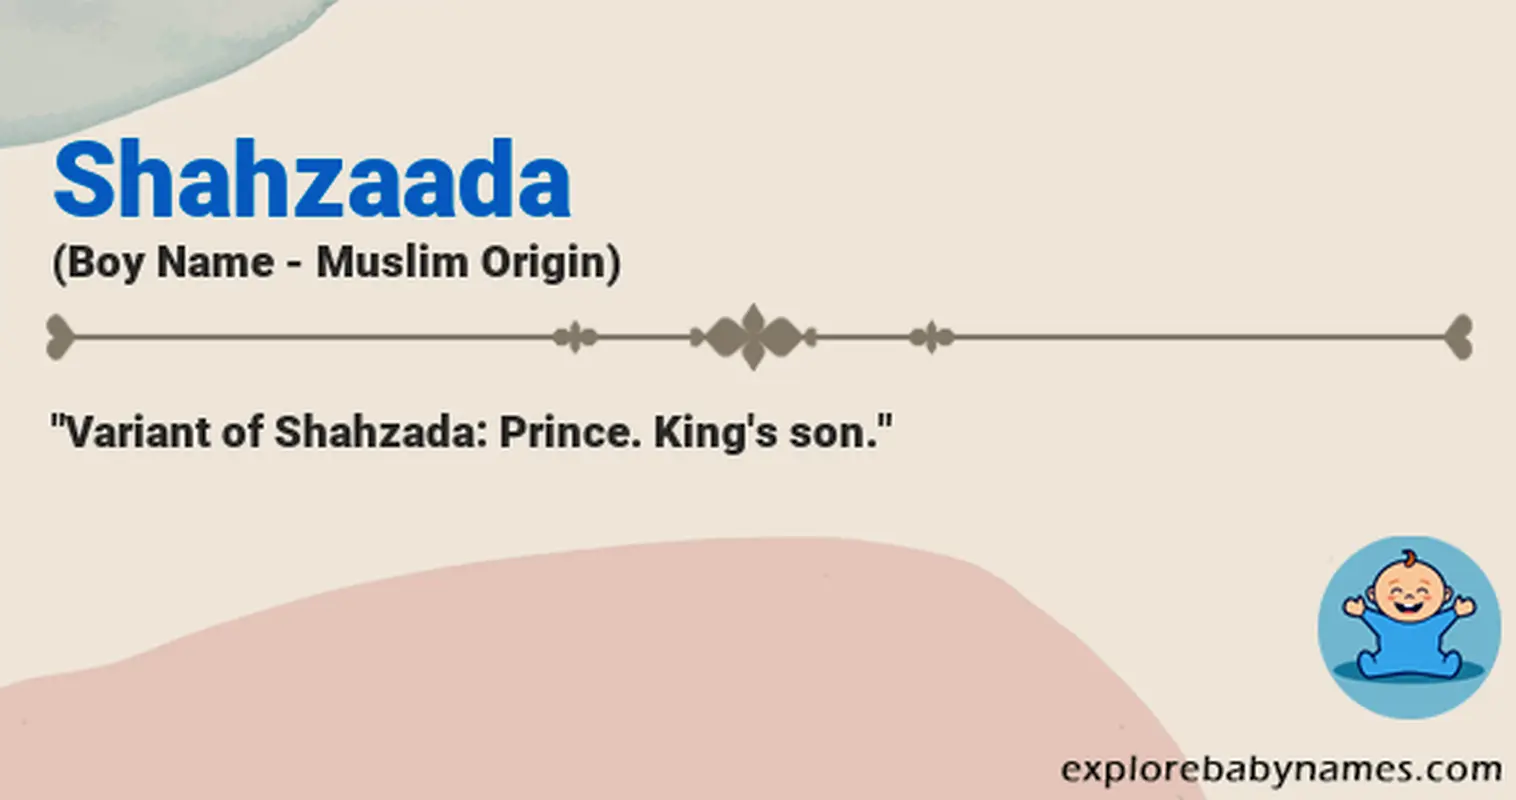 Meaning of Shahzaada